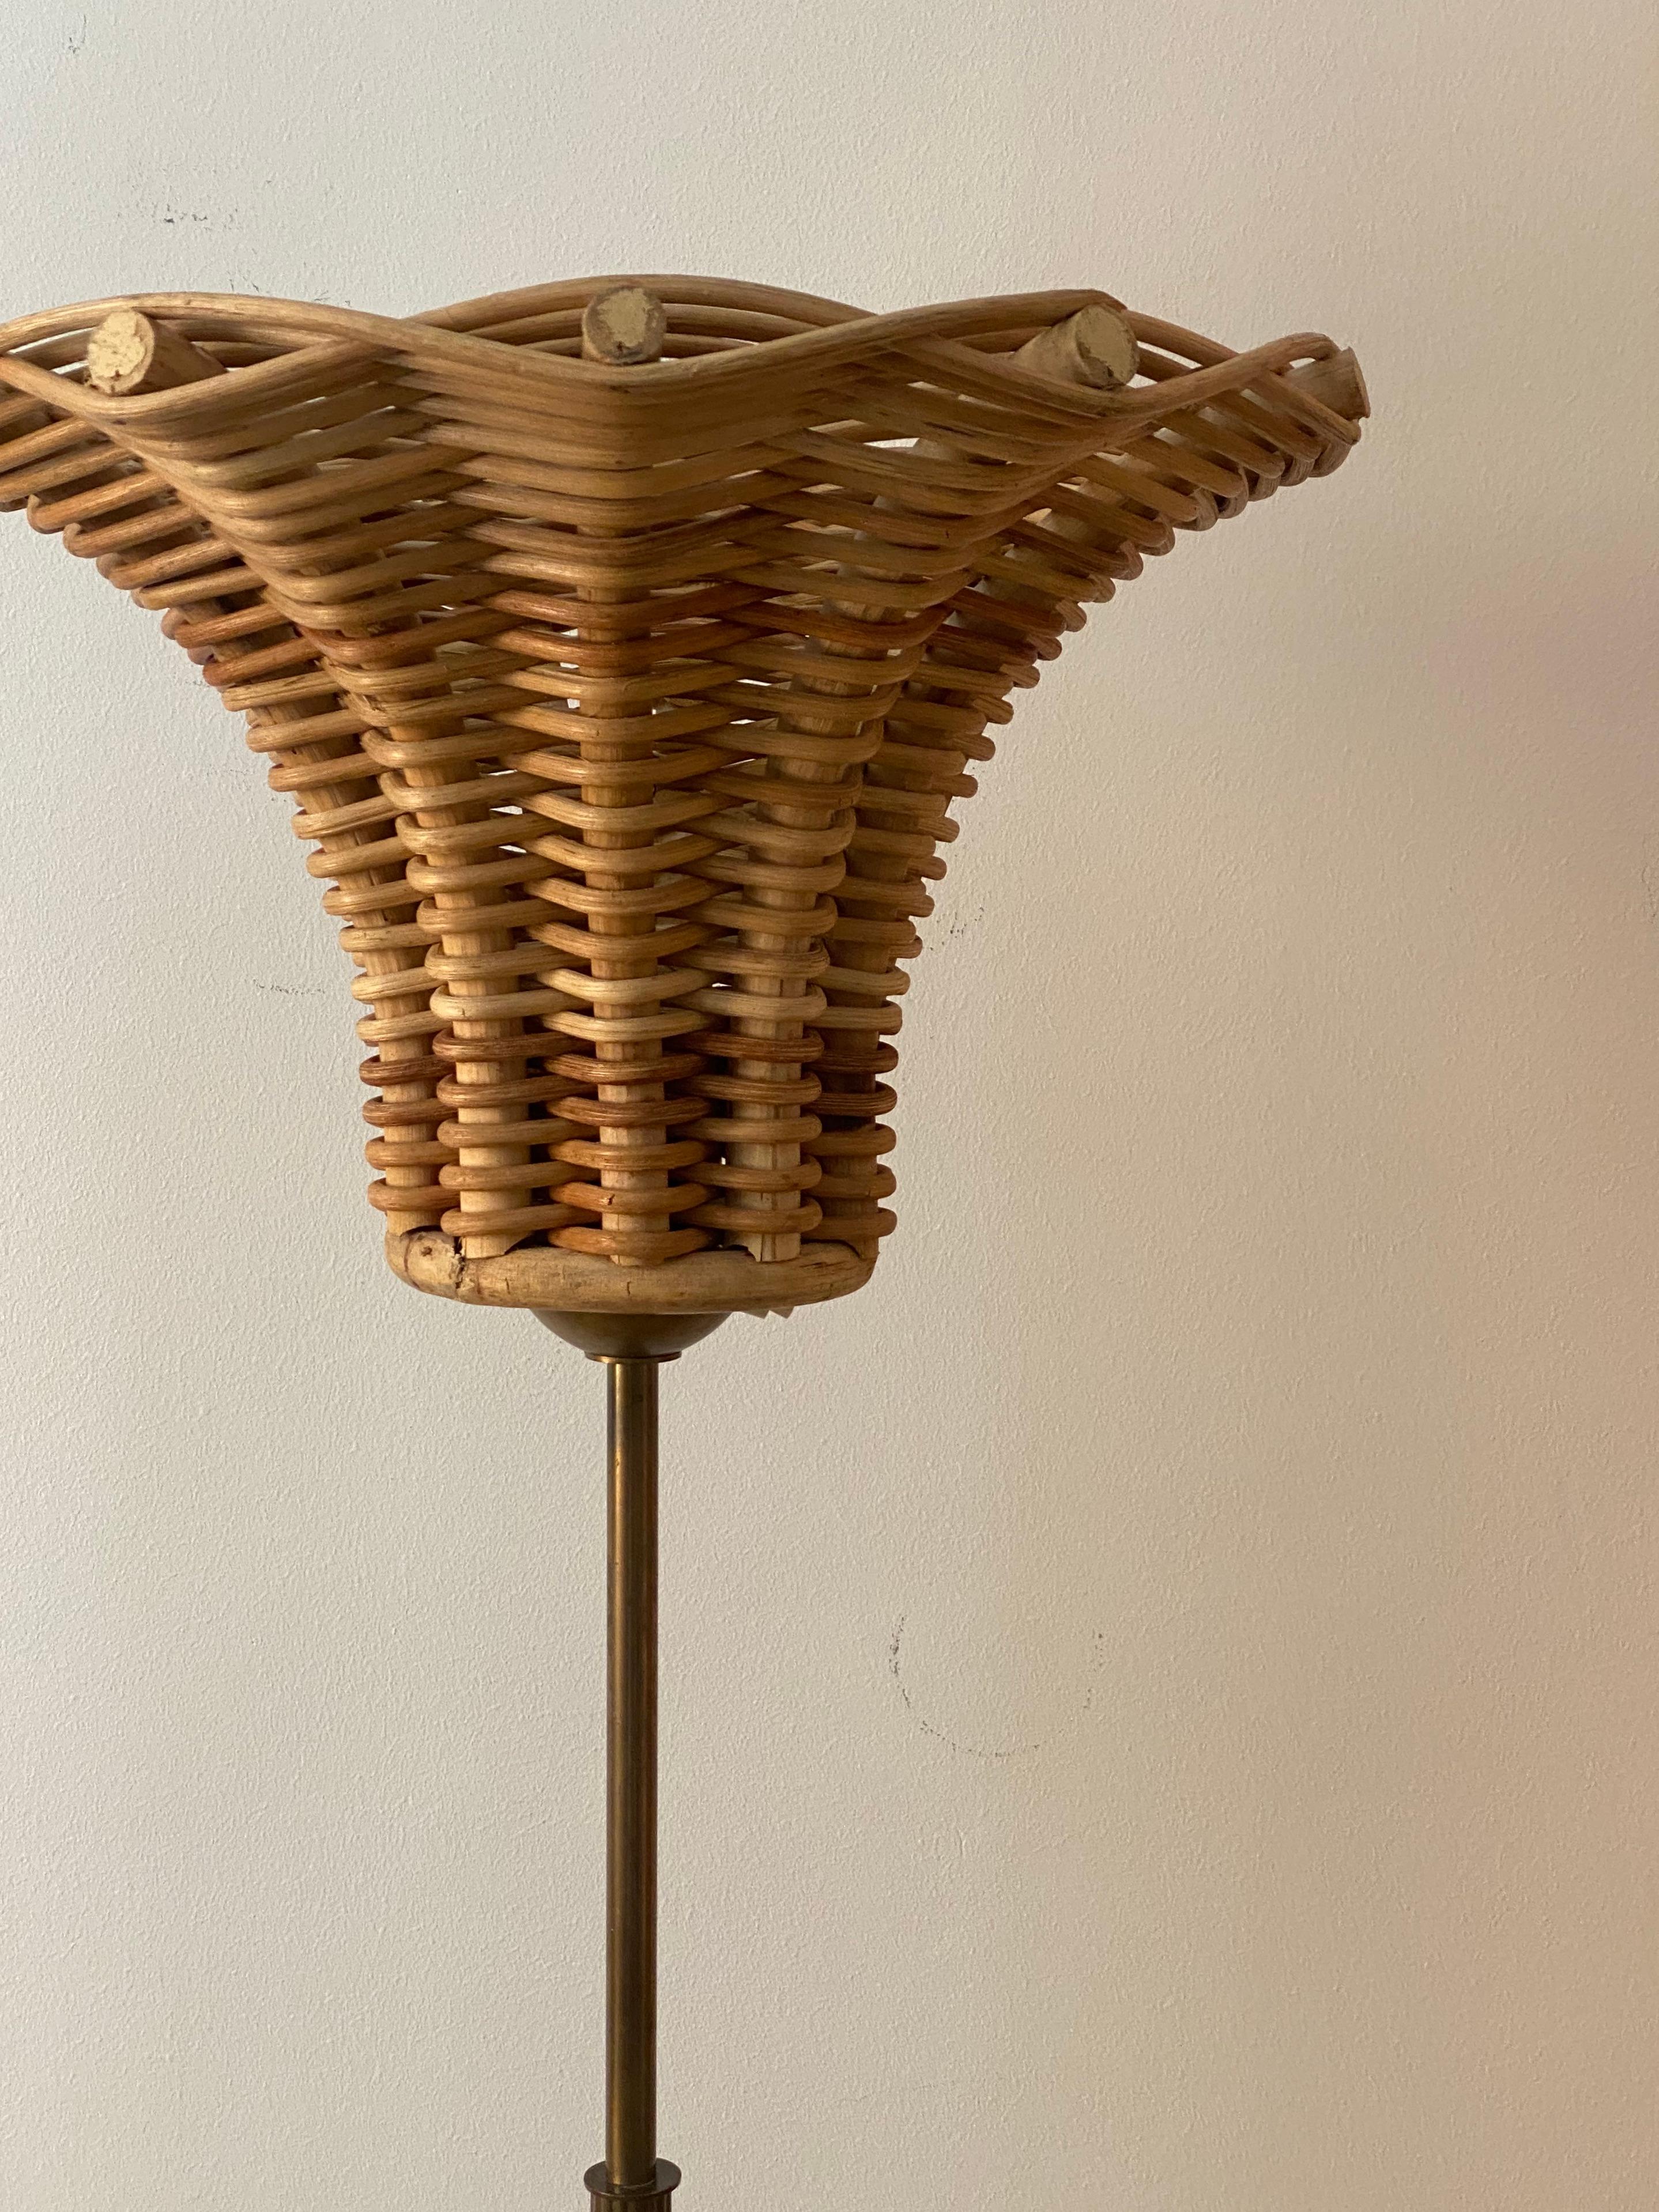 A floor lamp. By unknown Swedish designer, 1950s. Brass rod and base. Assorted vintage lampshade in bamboo and rattan.

Other designers of the period include Hans-Agne Jakobsson, Paavo Tynell, Josef Frank, Hans Bergström, and Alvar Aalto.